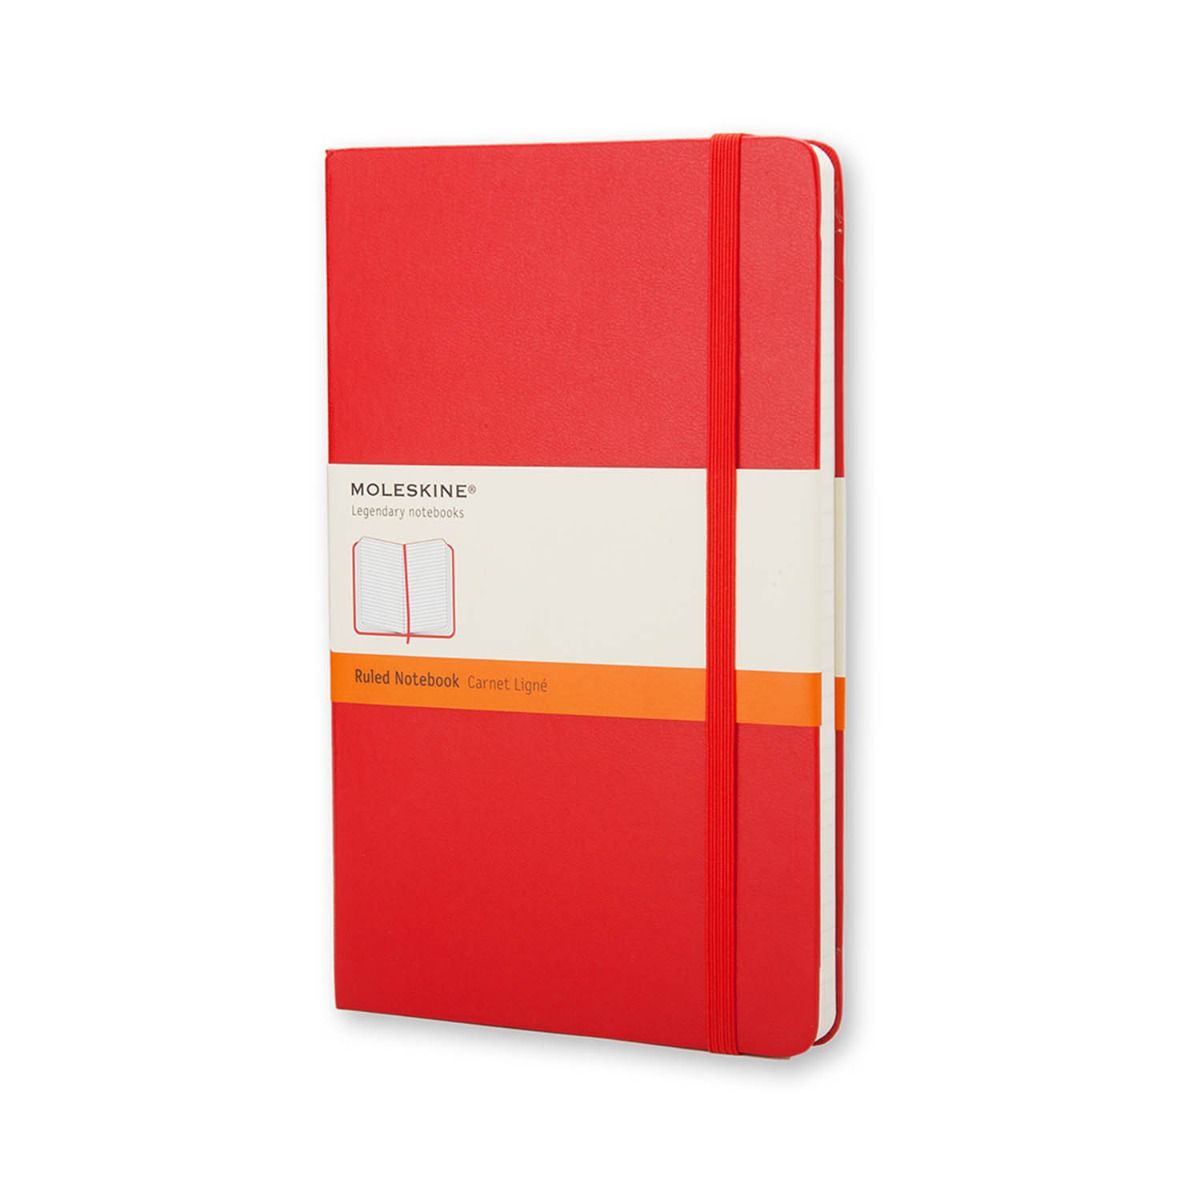 Moleskine Classic Notebook Ruled Hard Cover Pocket - Red